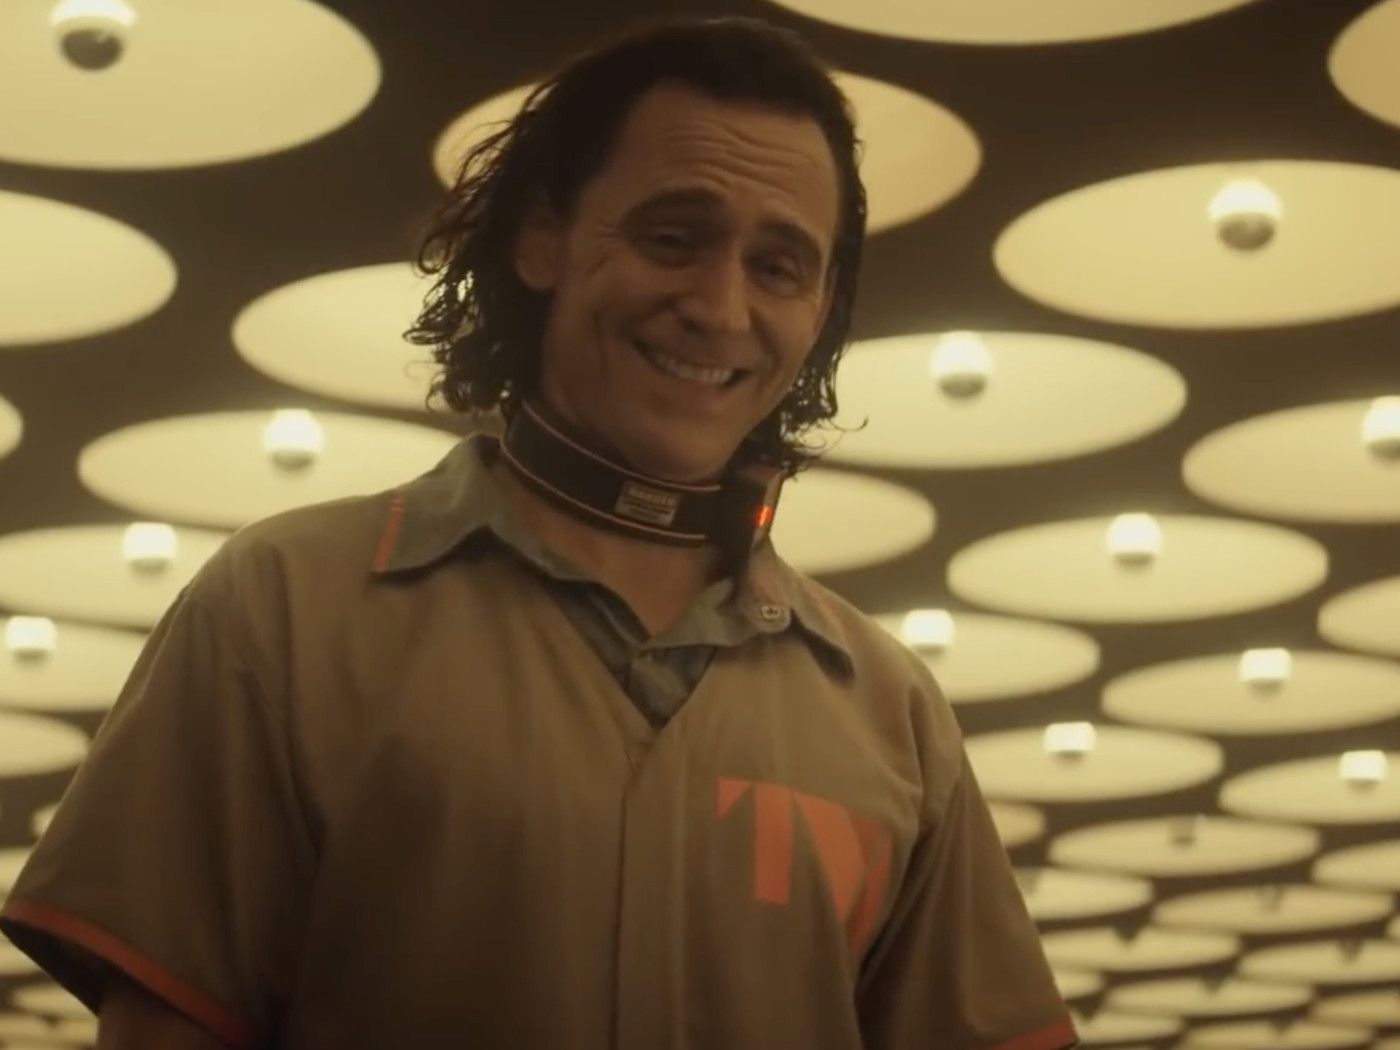 Loki realizes how screwed he is in the new Loki trailer